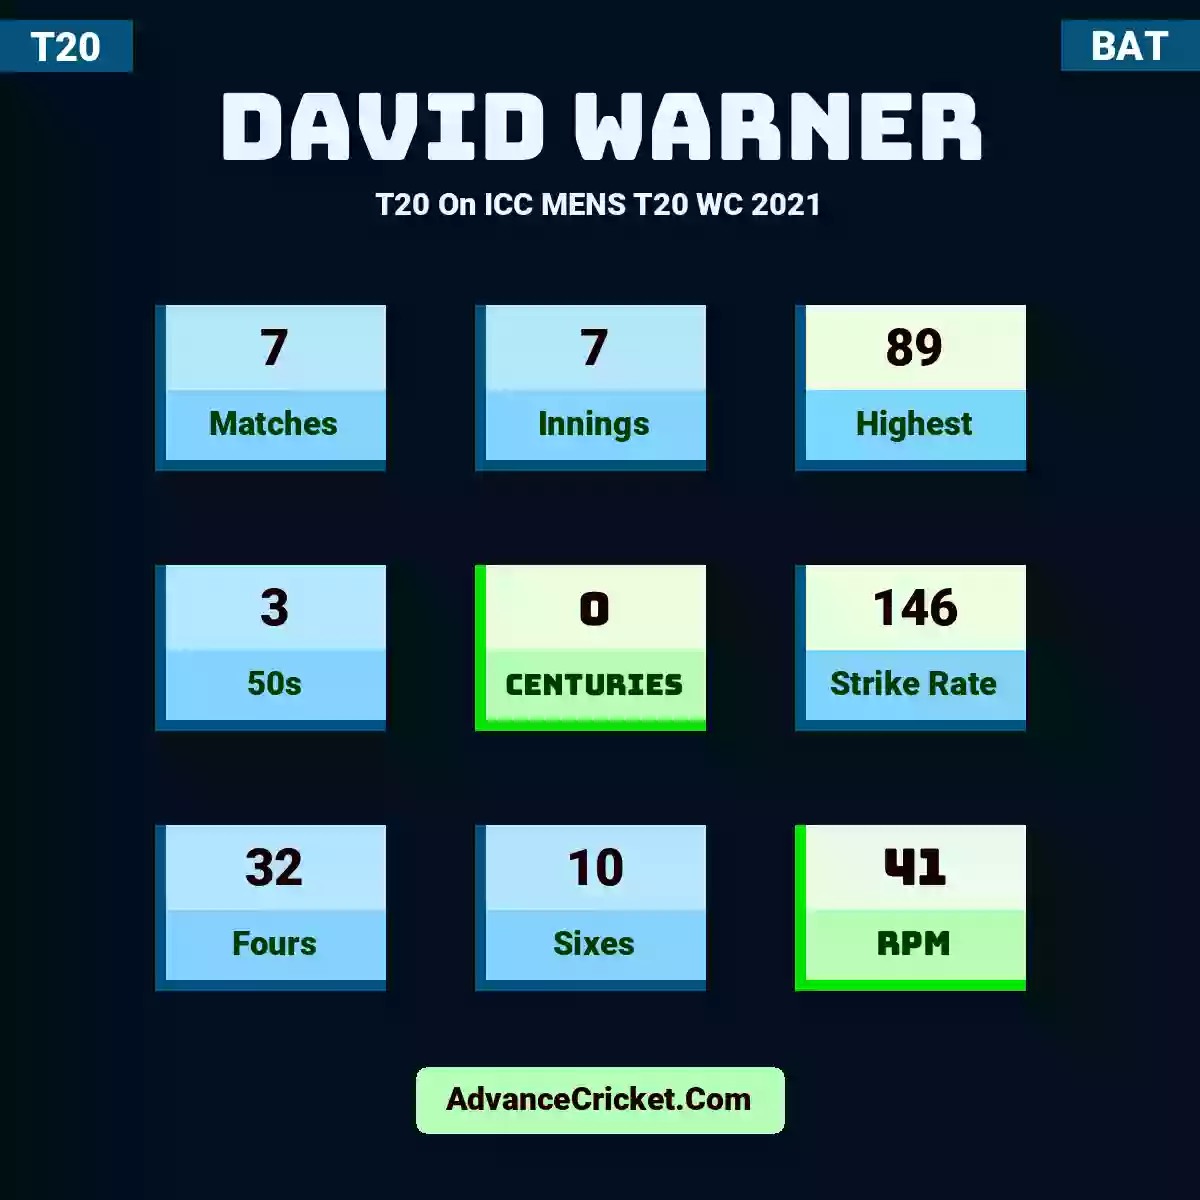 David Warner T20  On ICC MENS T20 WC 2021, David Warner played 7 matches, scored 89 runs as highest, 3 half-centuries, and 0 centuries, with a strike rate of 146. D.Warner hit 32 fours and 10 sixes, with an RPM of 41.